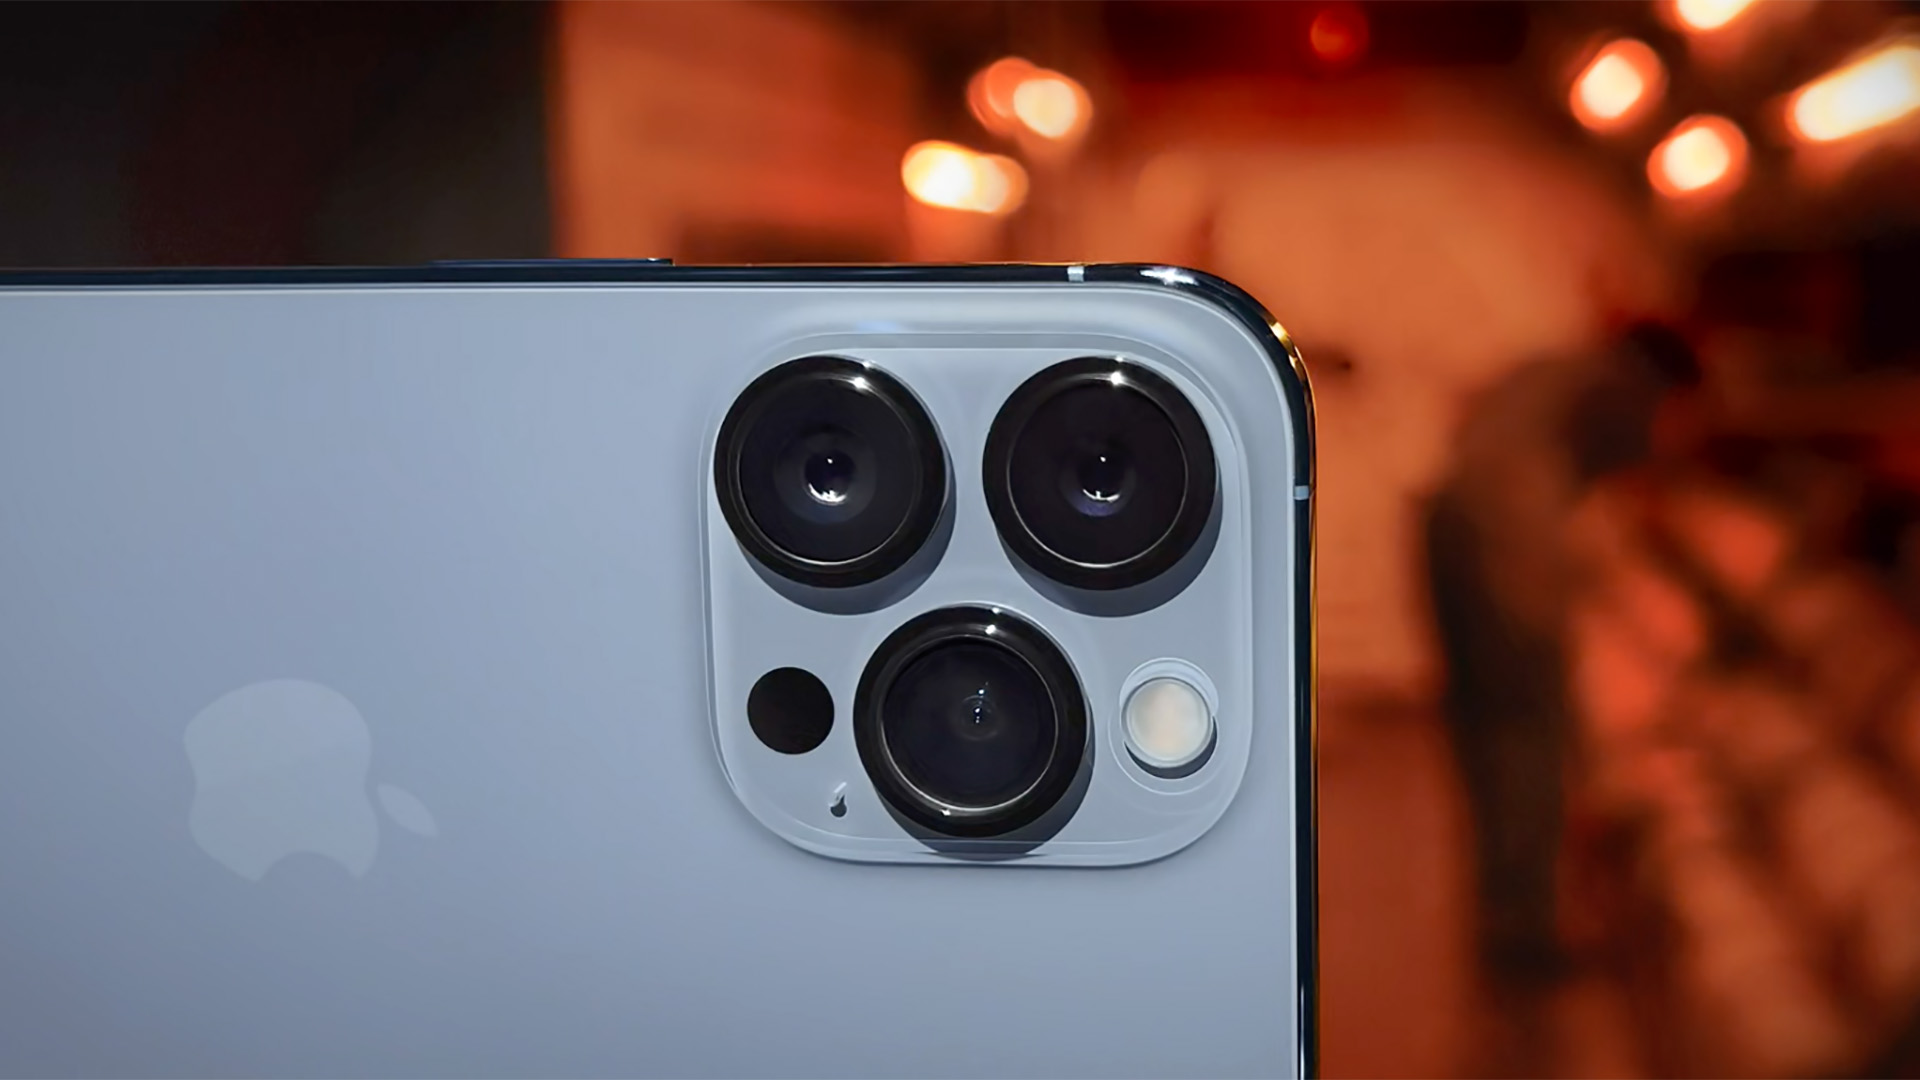 The rear camera module of the iPhone 13